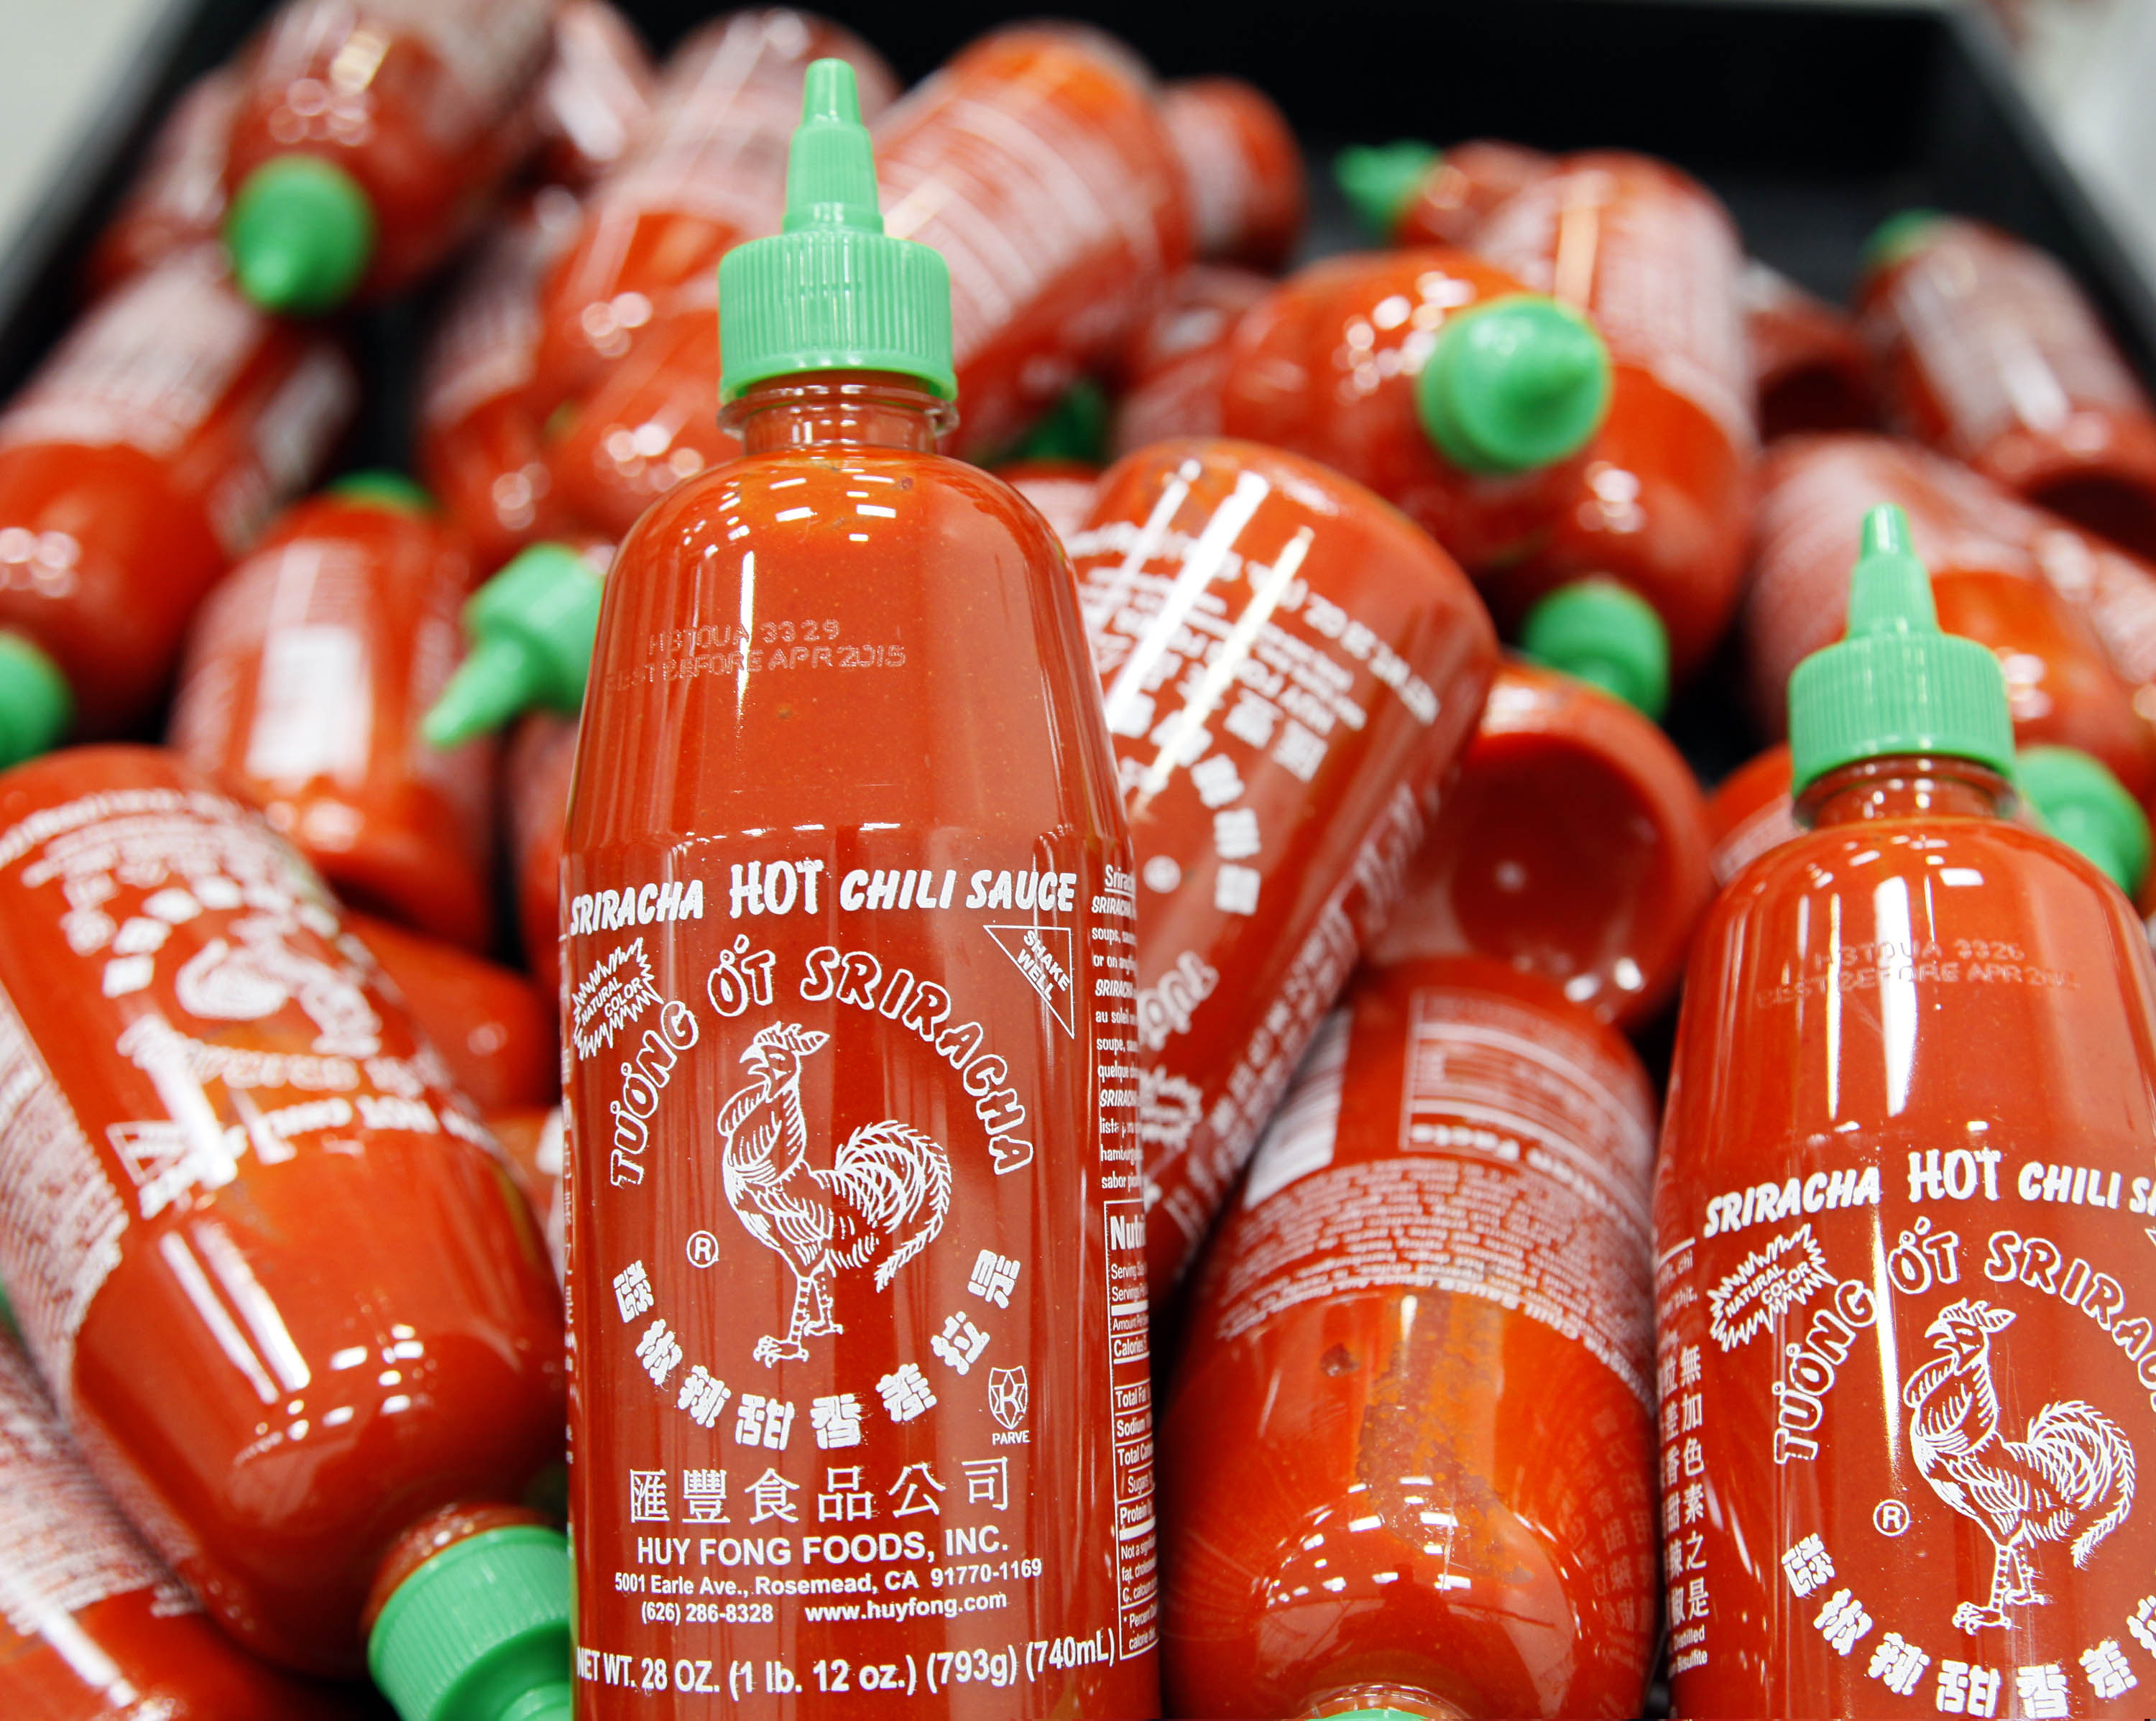 $70 a bottle! Shortage of this popular spicy sauce making it a hot